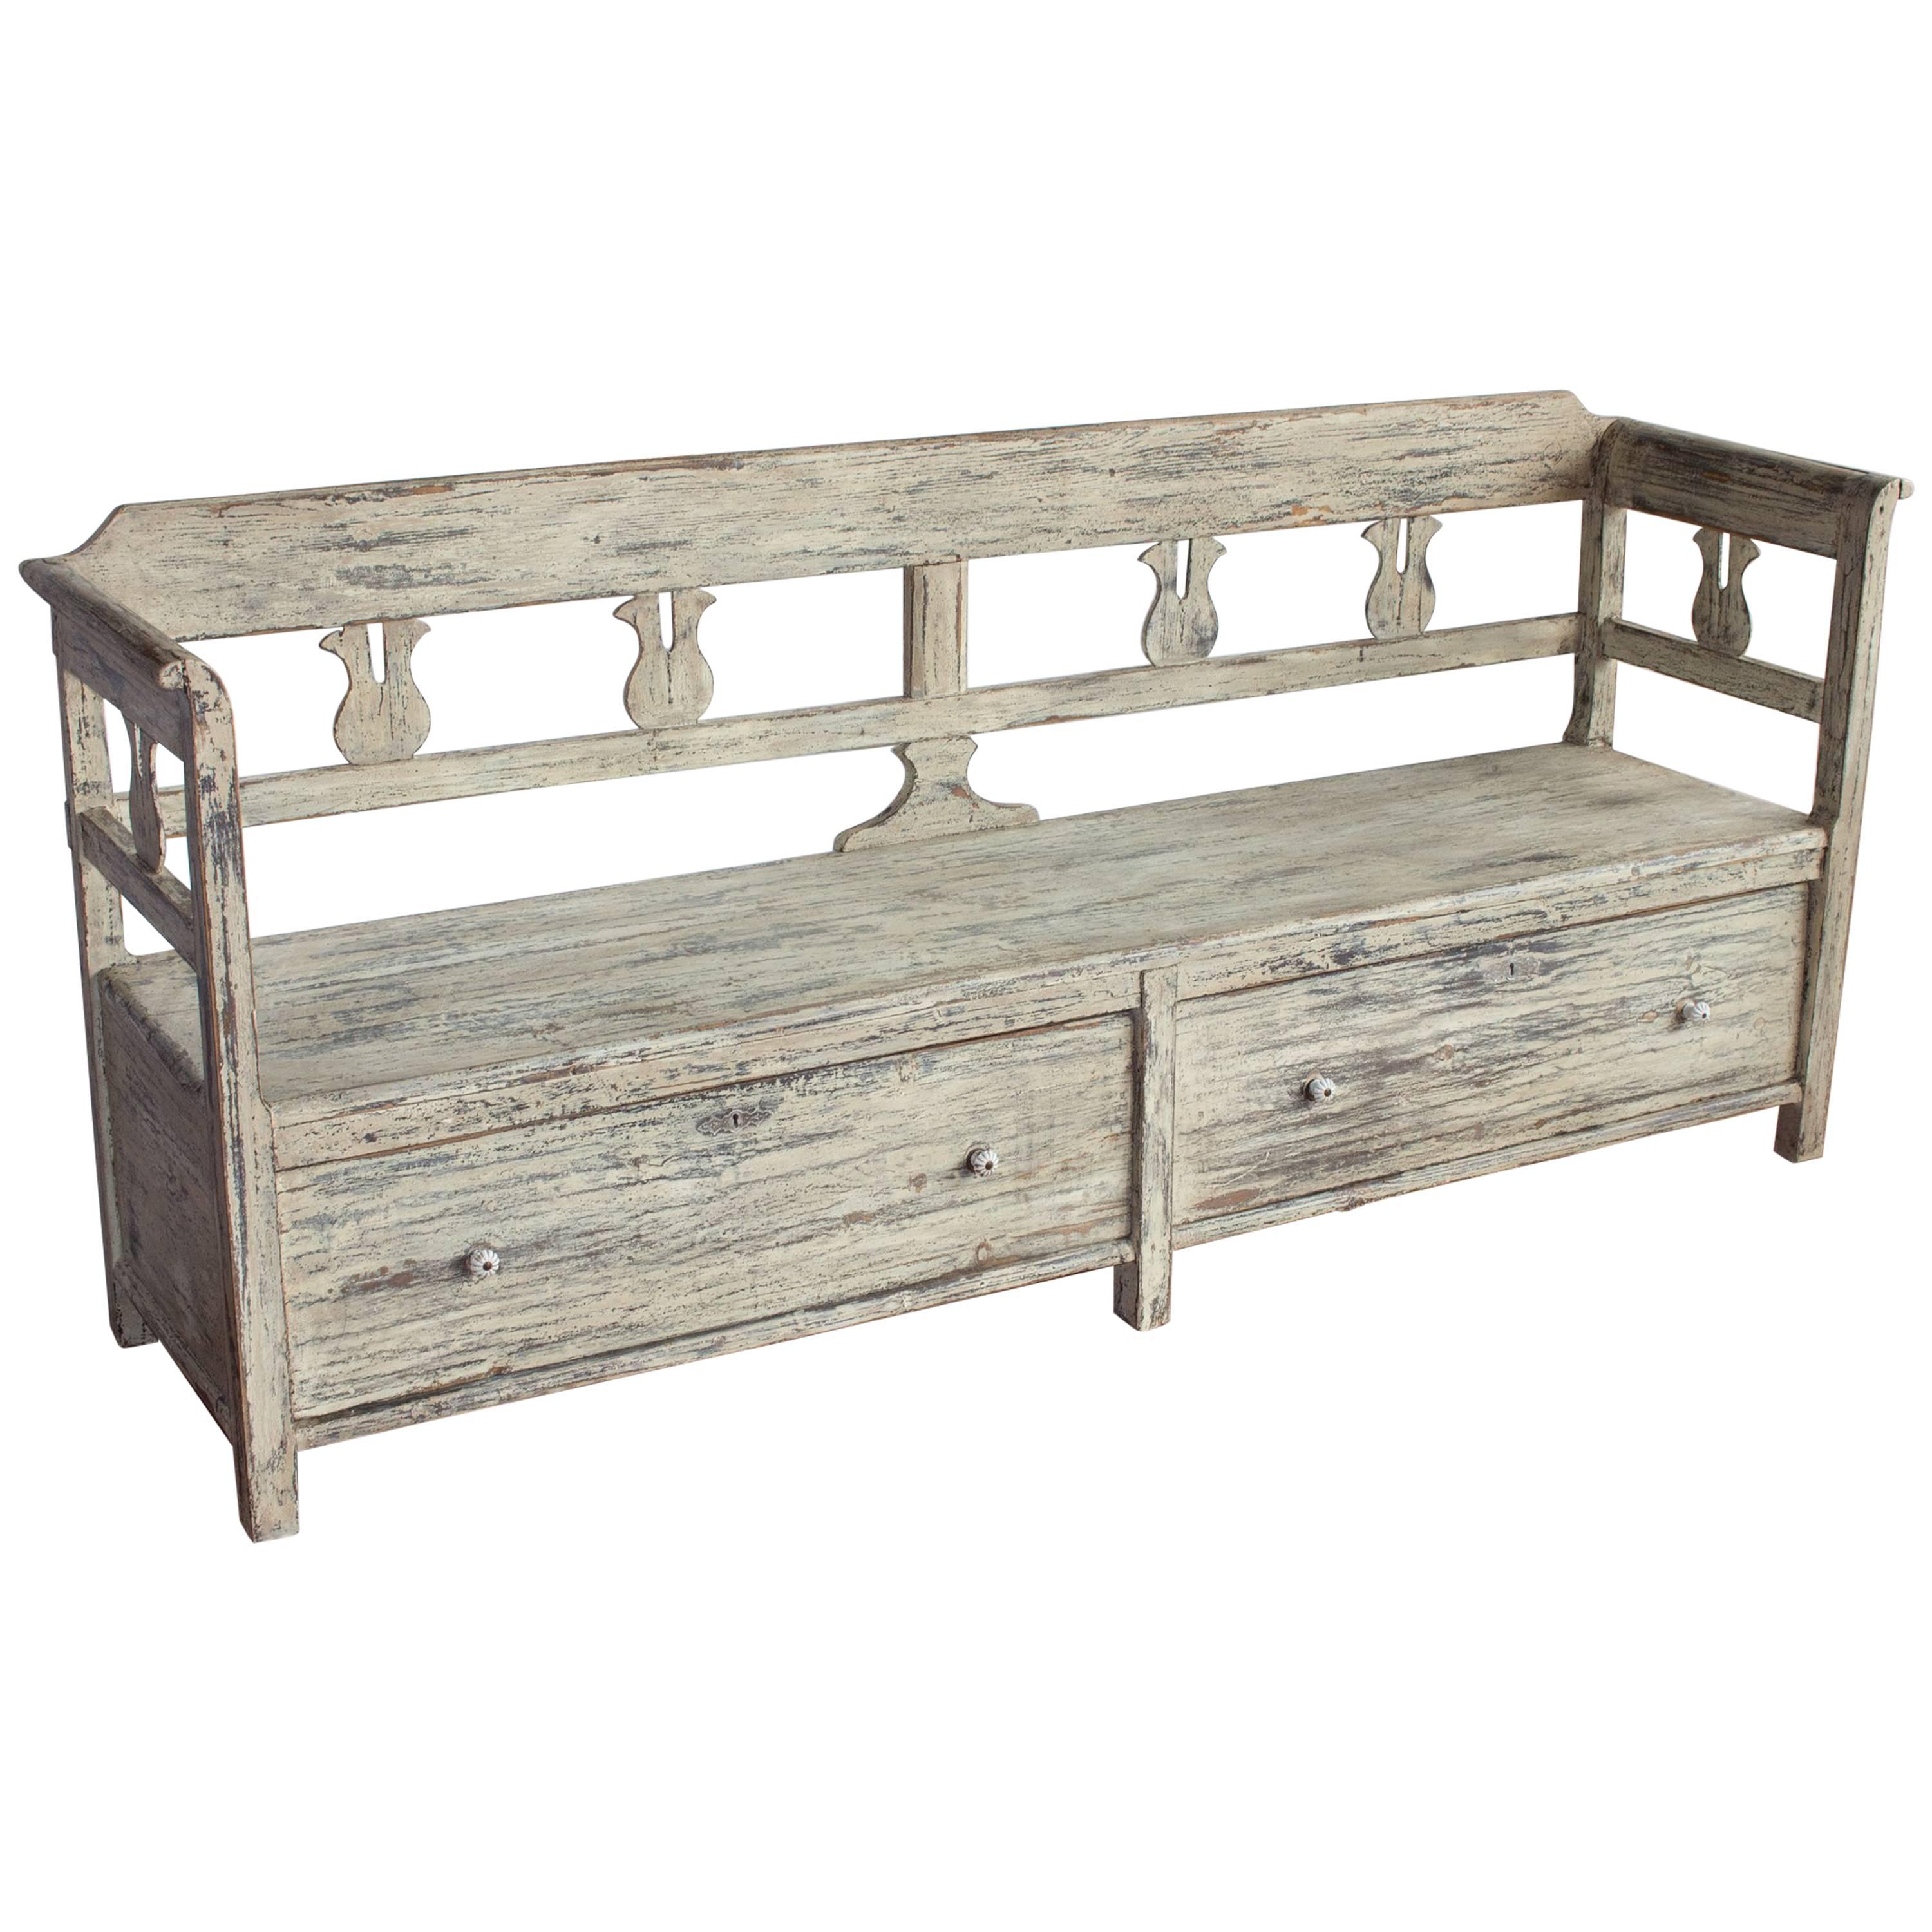 Antique Stripped Back Bench